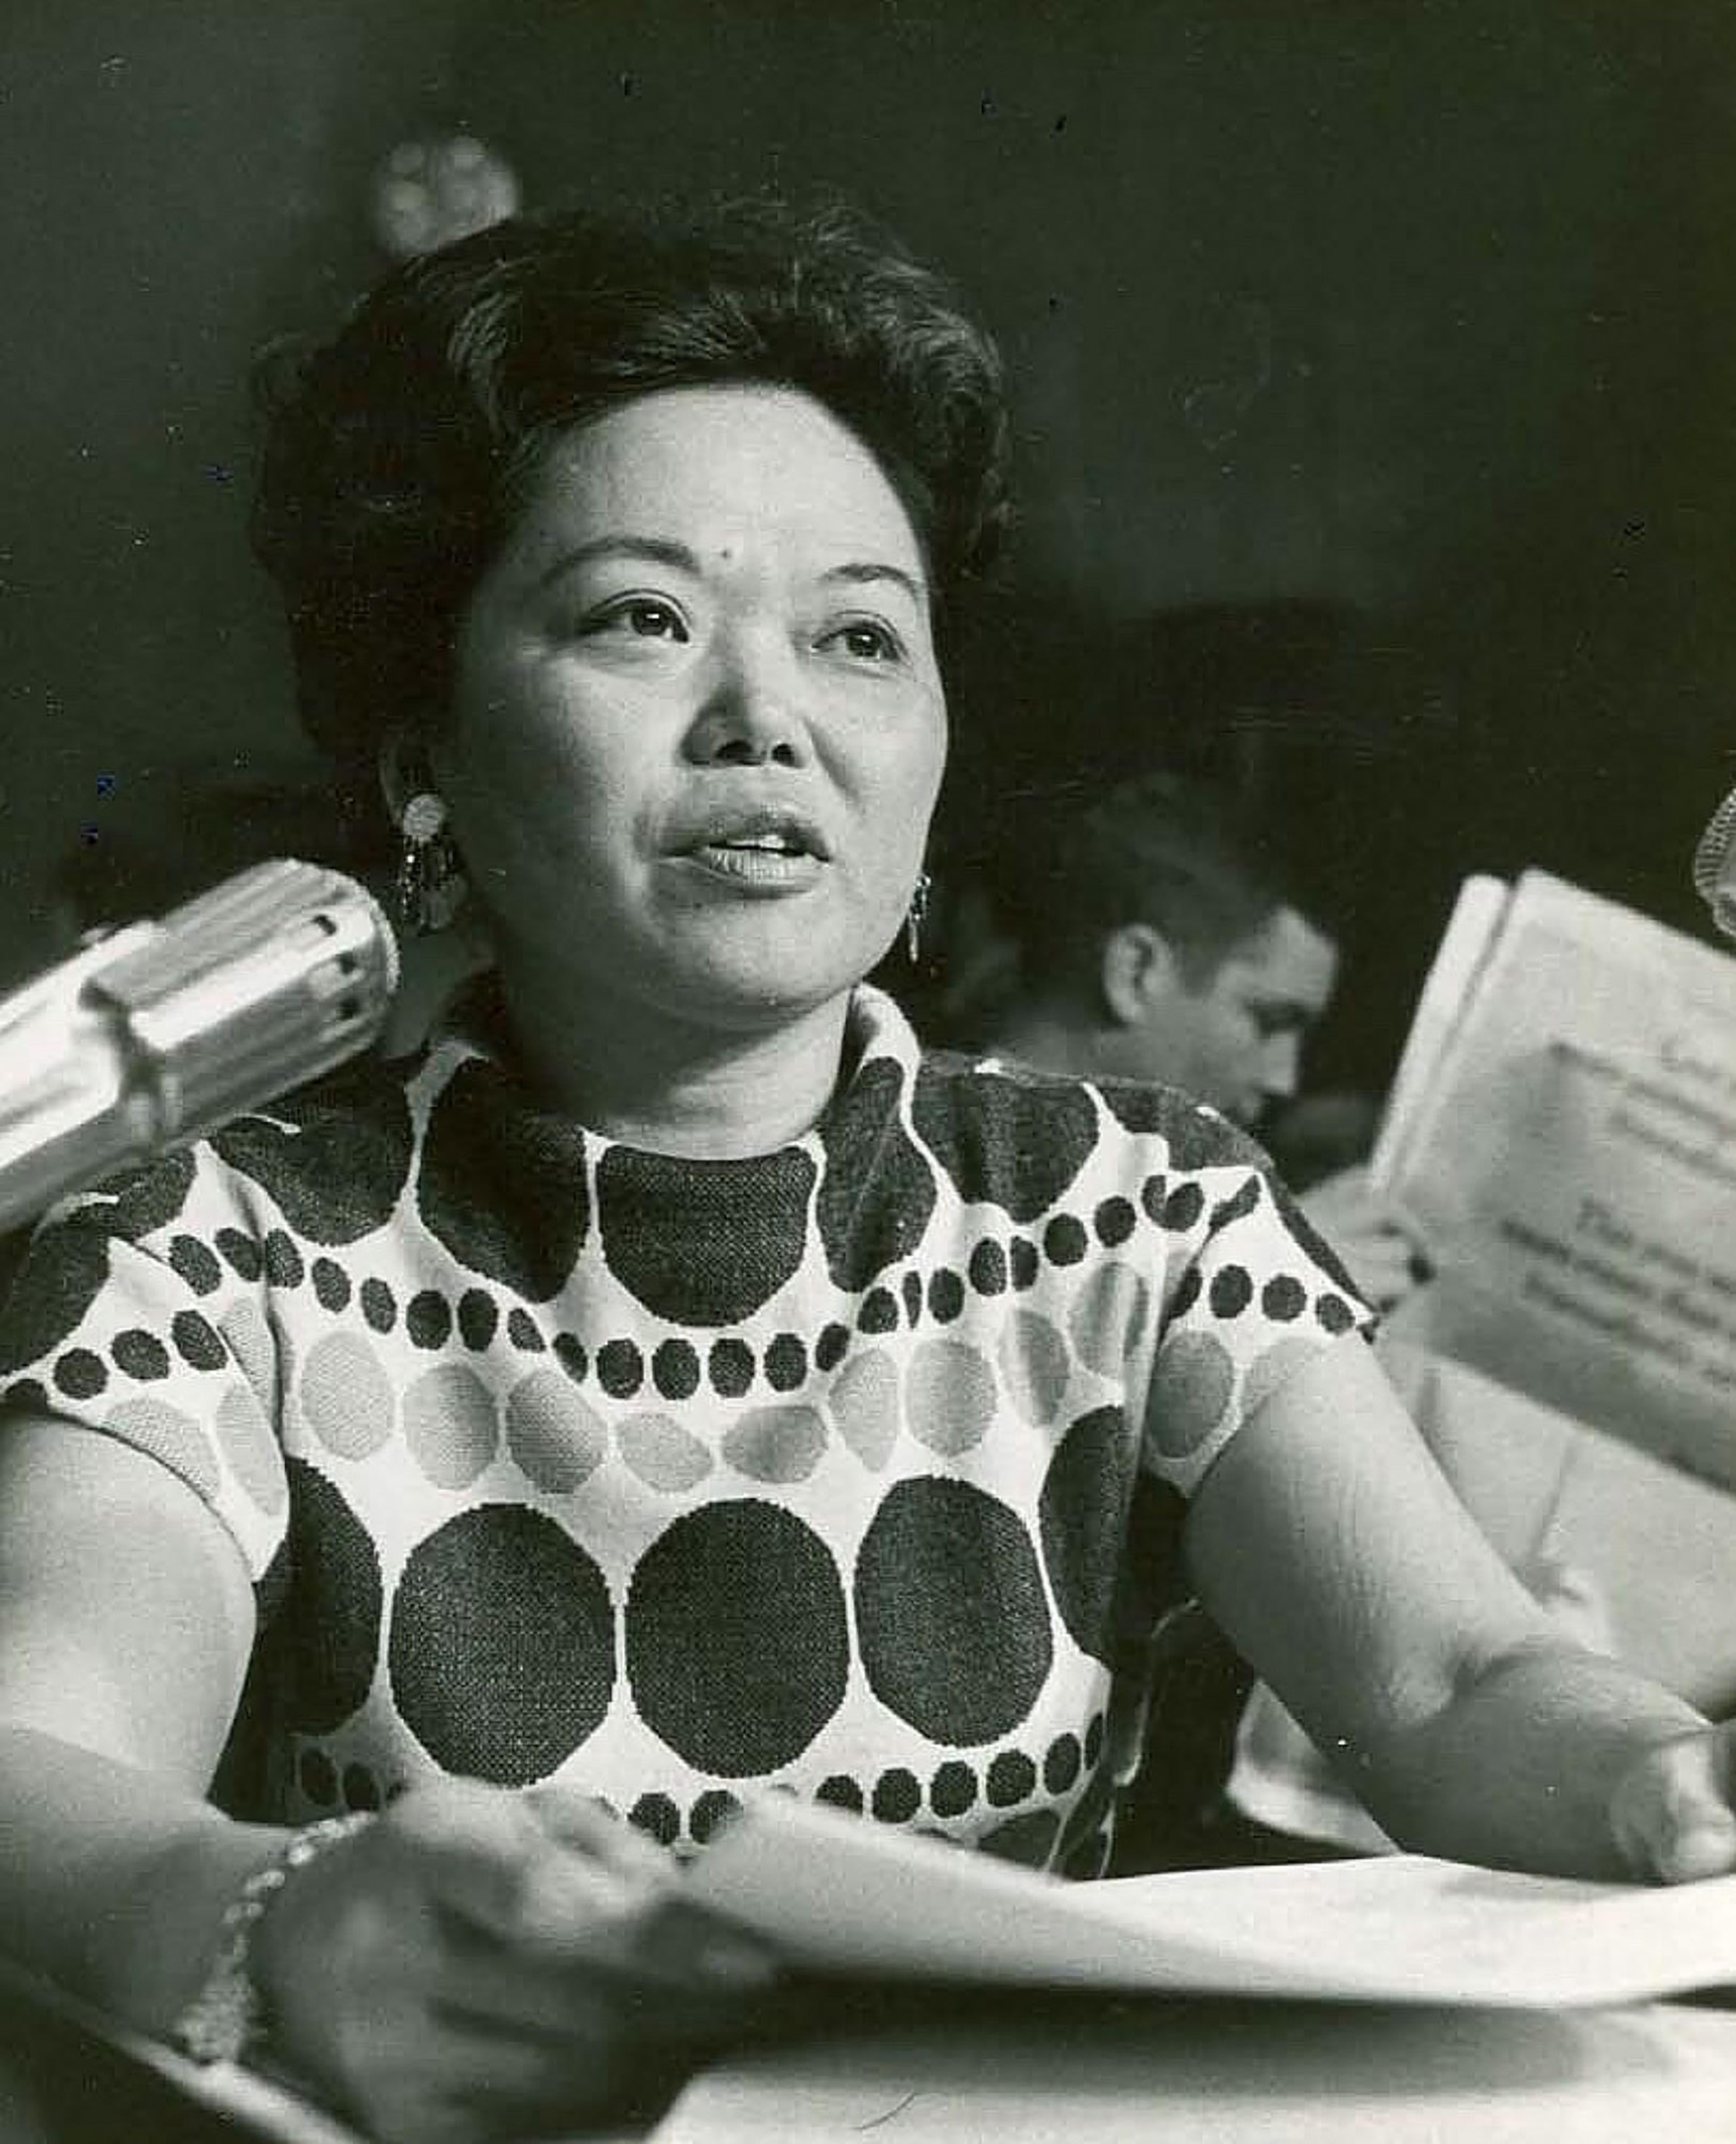 Patsy Takemoto Mink testifying before the Senate Judiciary Committee against Supreme Court nominee Harold Carswell around 1971-1972. (Courtesy Gwendolyn Mink/Patsy Takemoto Mink papers, Library of Congress)